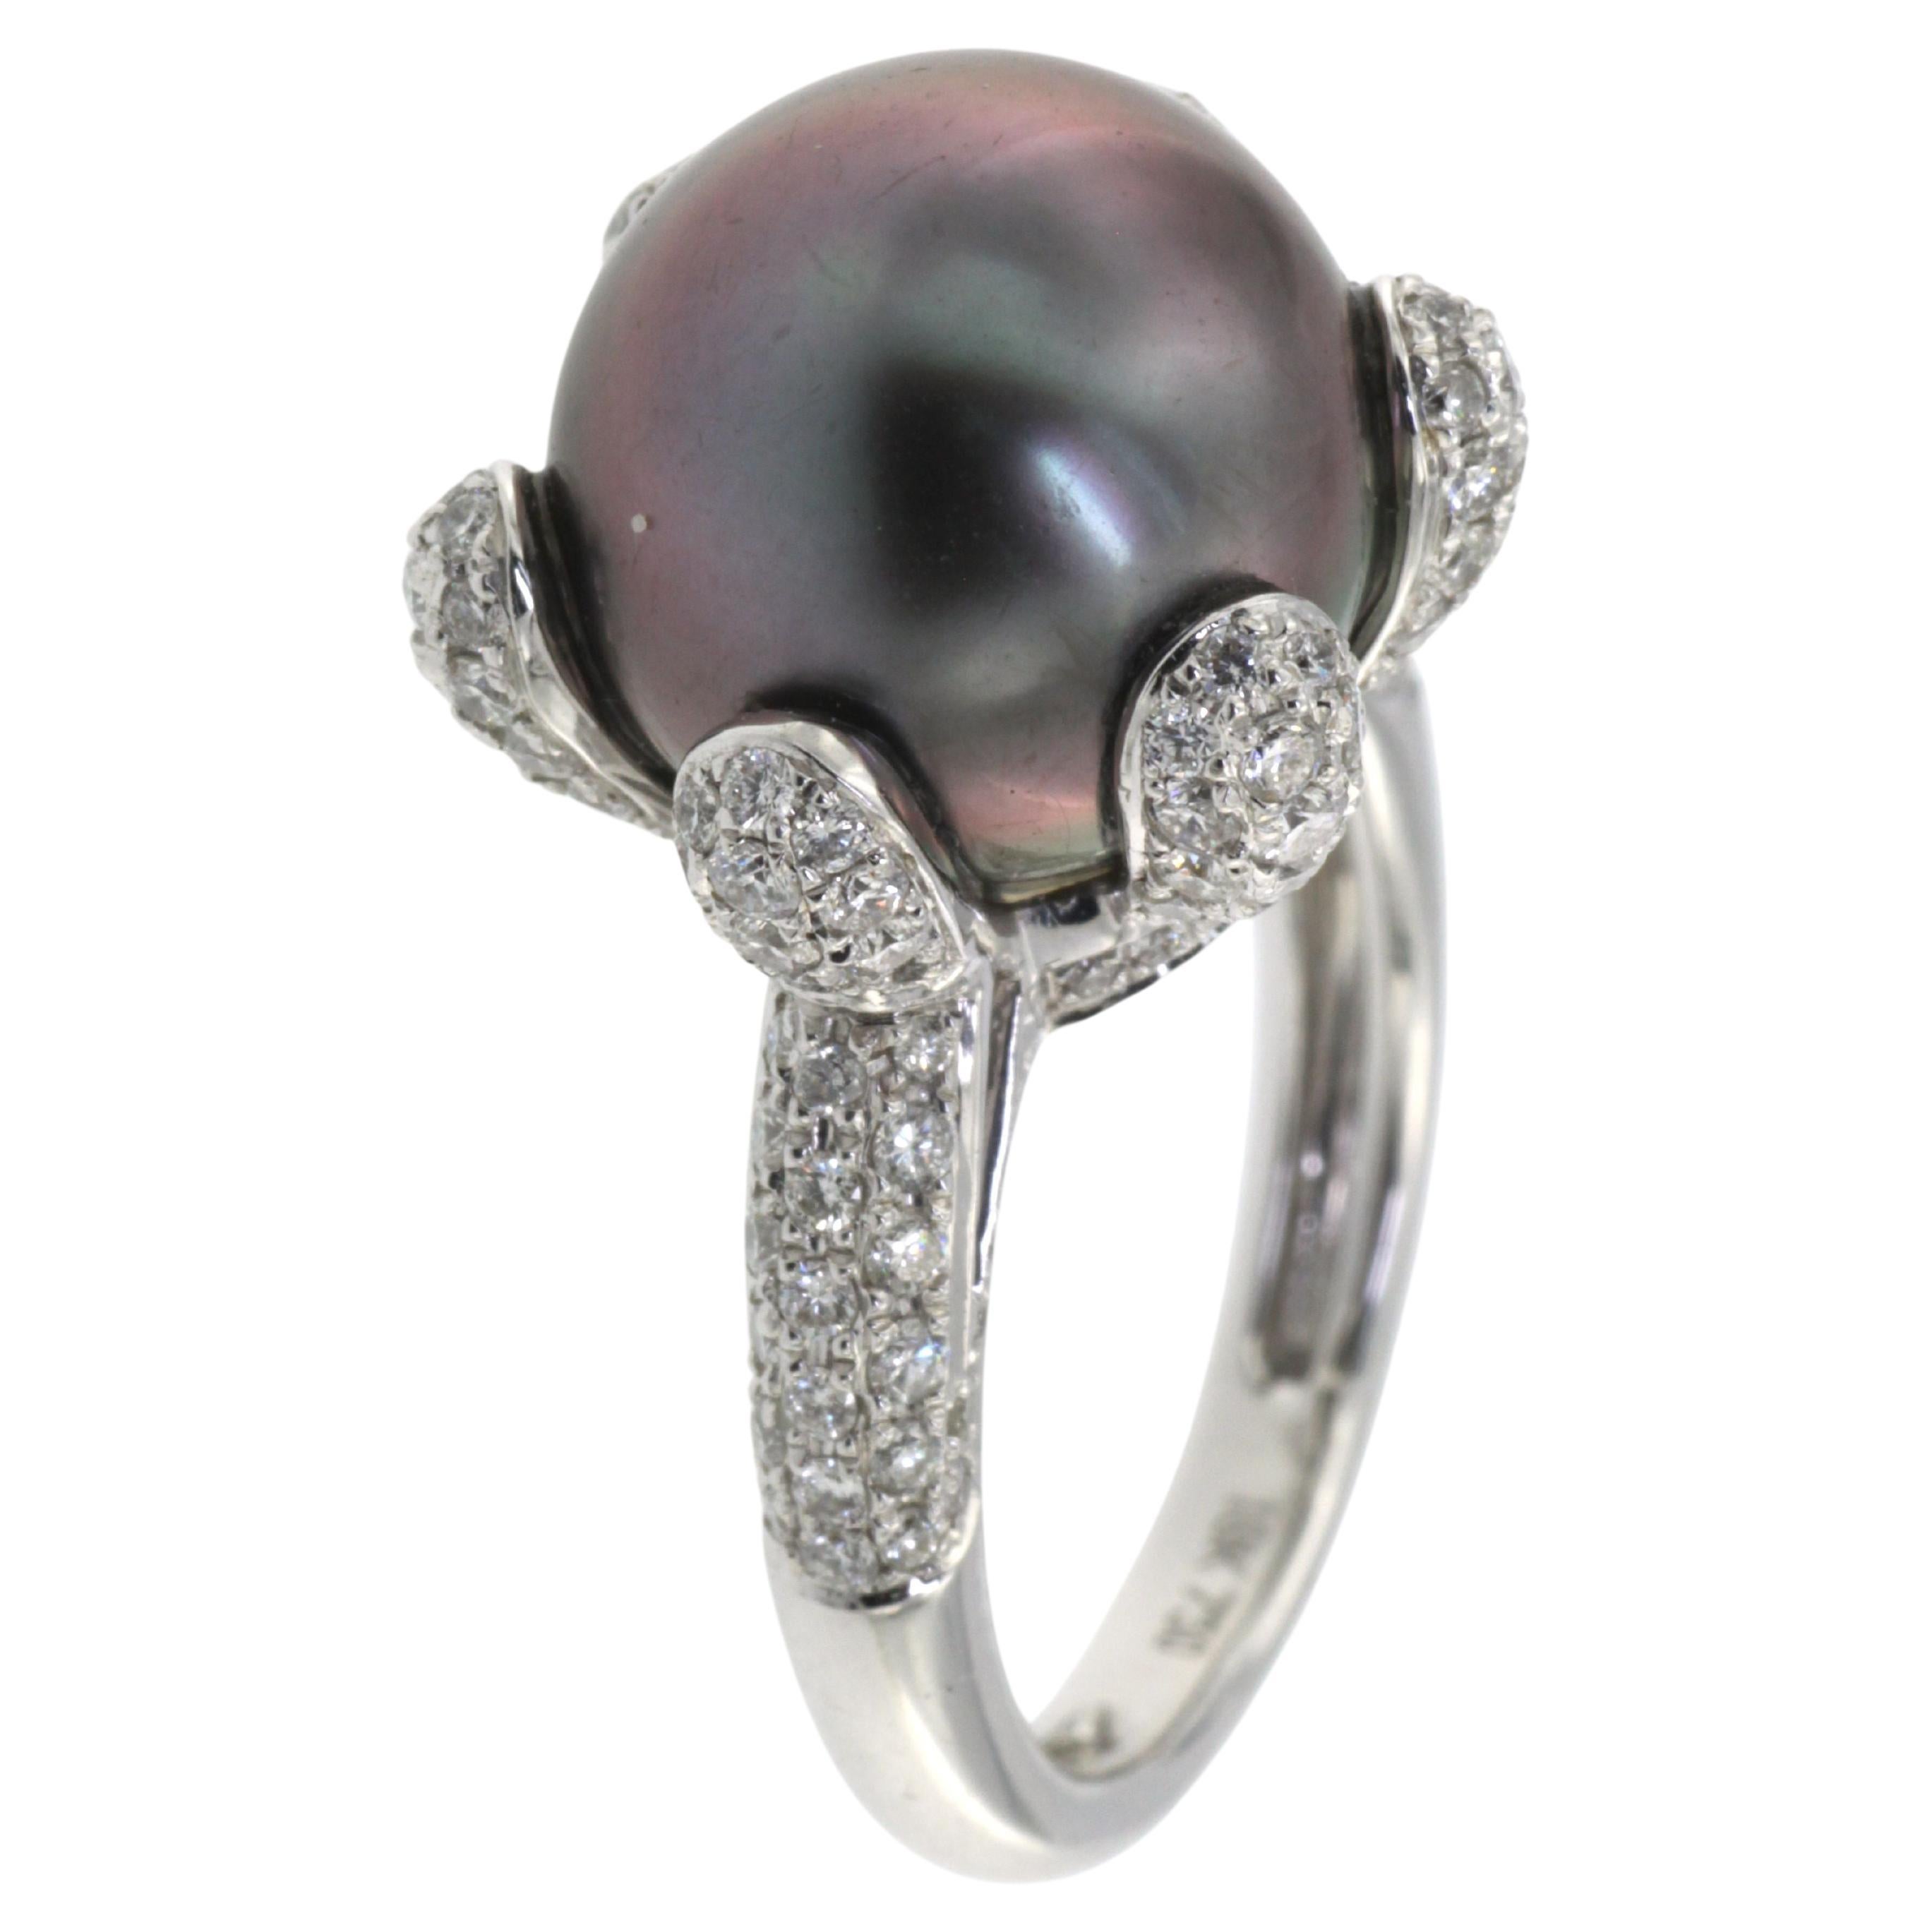 Experience luxury at your fingertips with this magnificent ring. At its heart lies a captivating 12mm Tahitian black pearl, radiating an enigmatic luster that beckons admiration. Elegantly encircling this majestic gem are 1.24 carats of white round